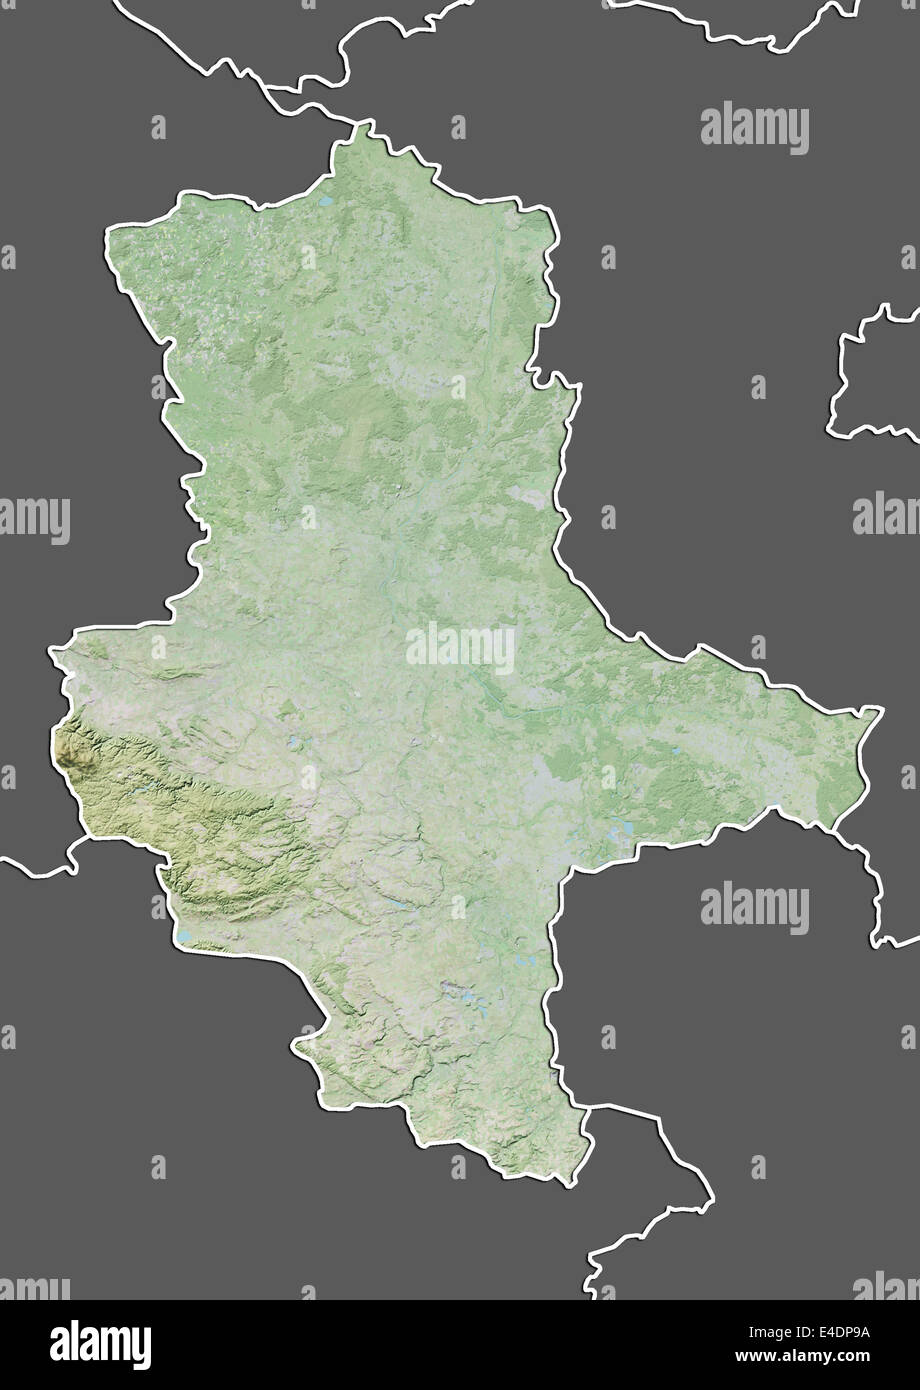 State of Saxony-Anhalt, Germany, Relief Map Stock Photo